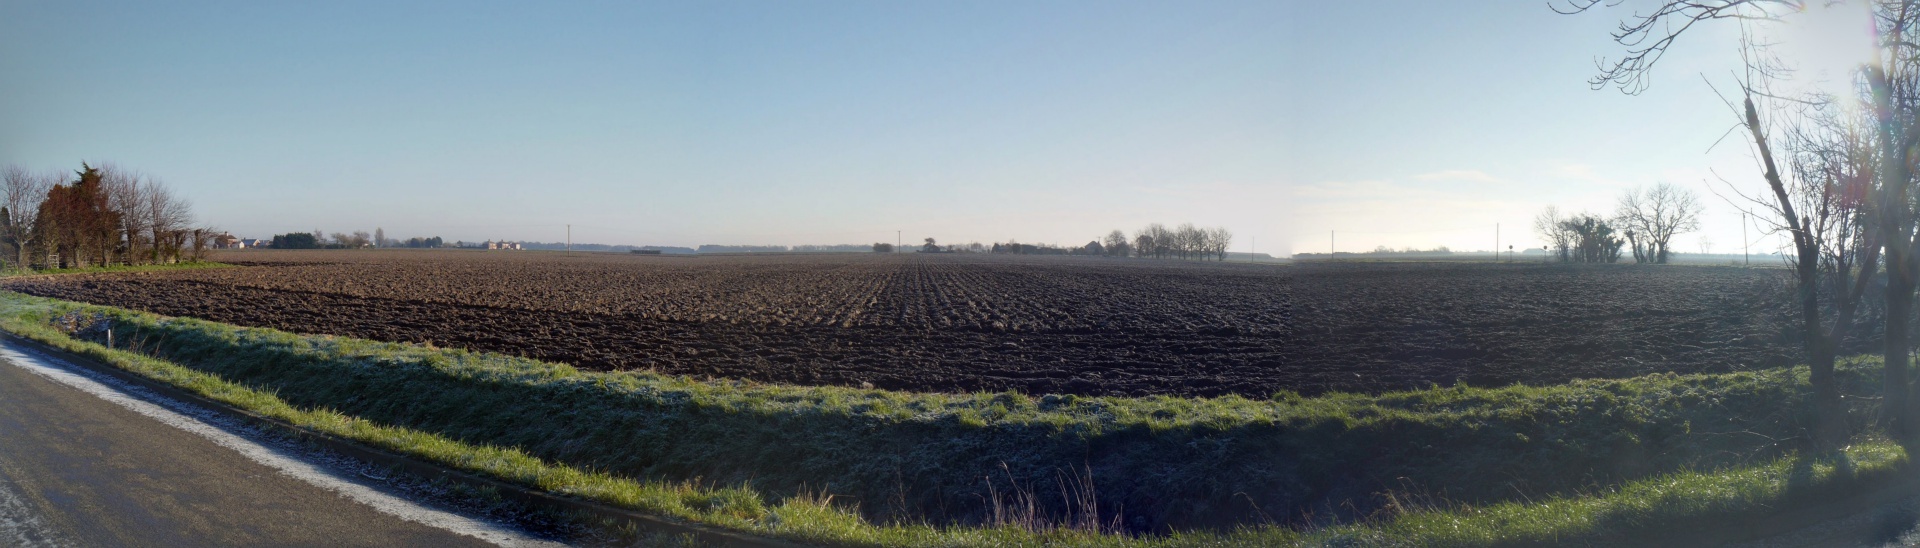 Select this image to see a larger version. P1050701 PANO.
10:27:13am Sun 18 Jan 2015.
A Lincolnshire Field.
